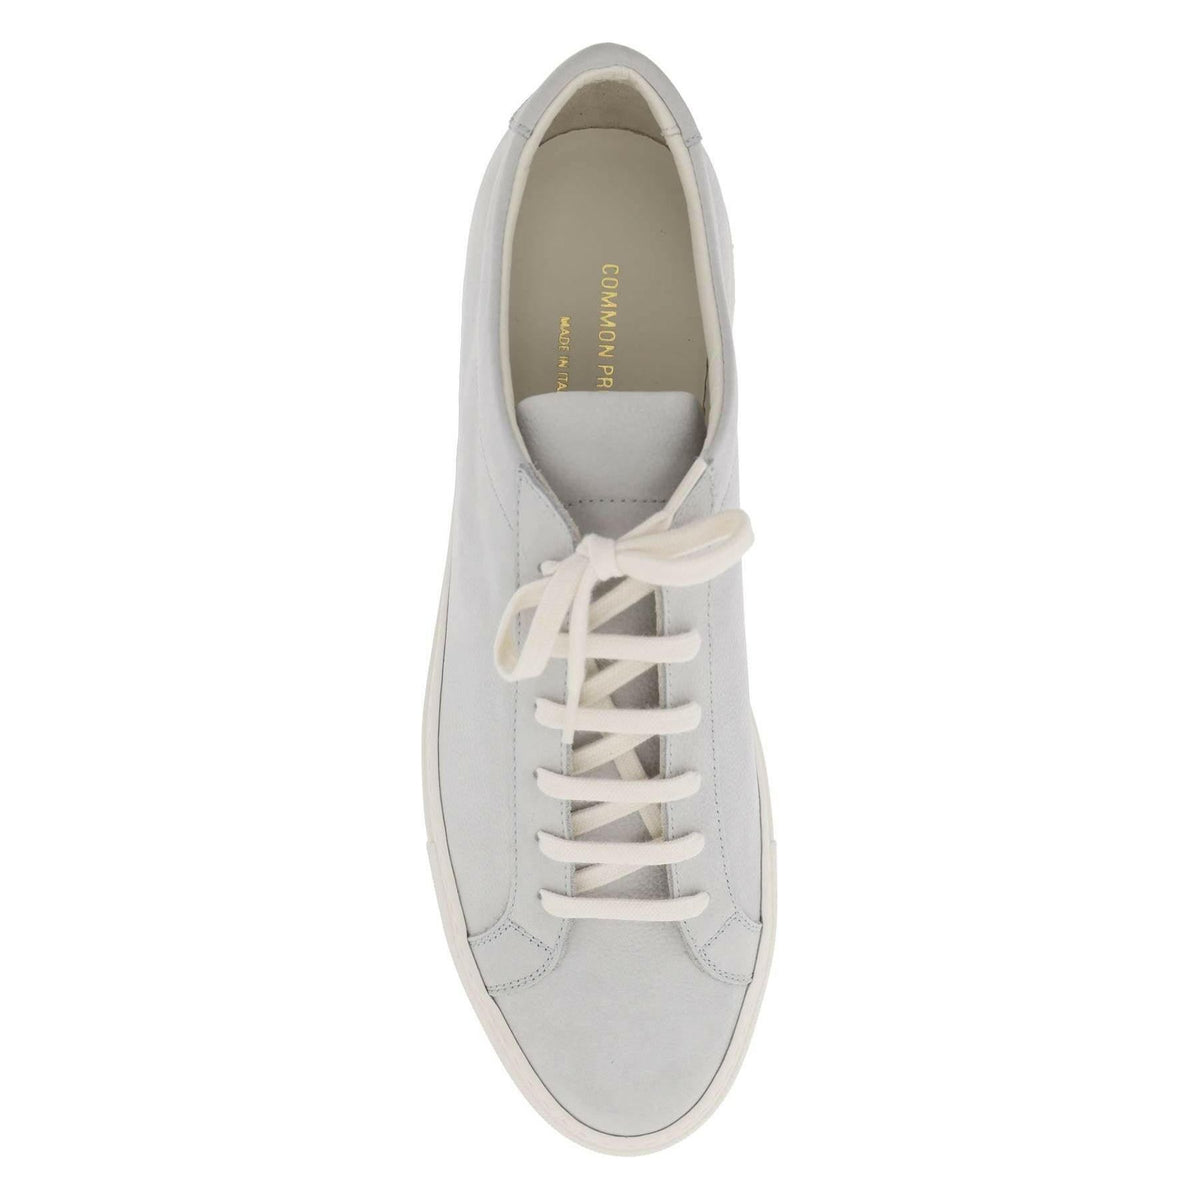 Grey Original Achilles Low-Top Leather Sneakers COMMON PROJECTS JOHN JULIA.